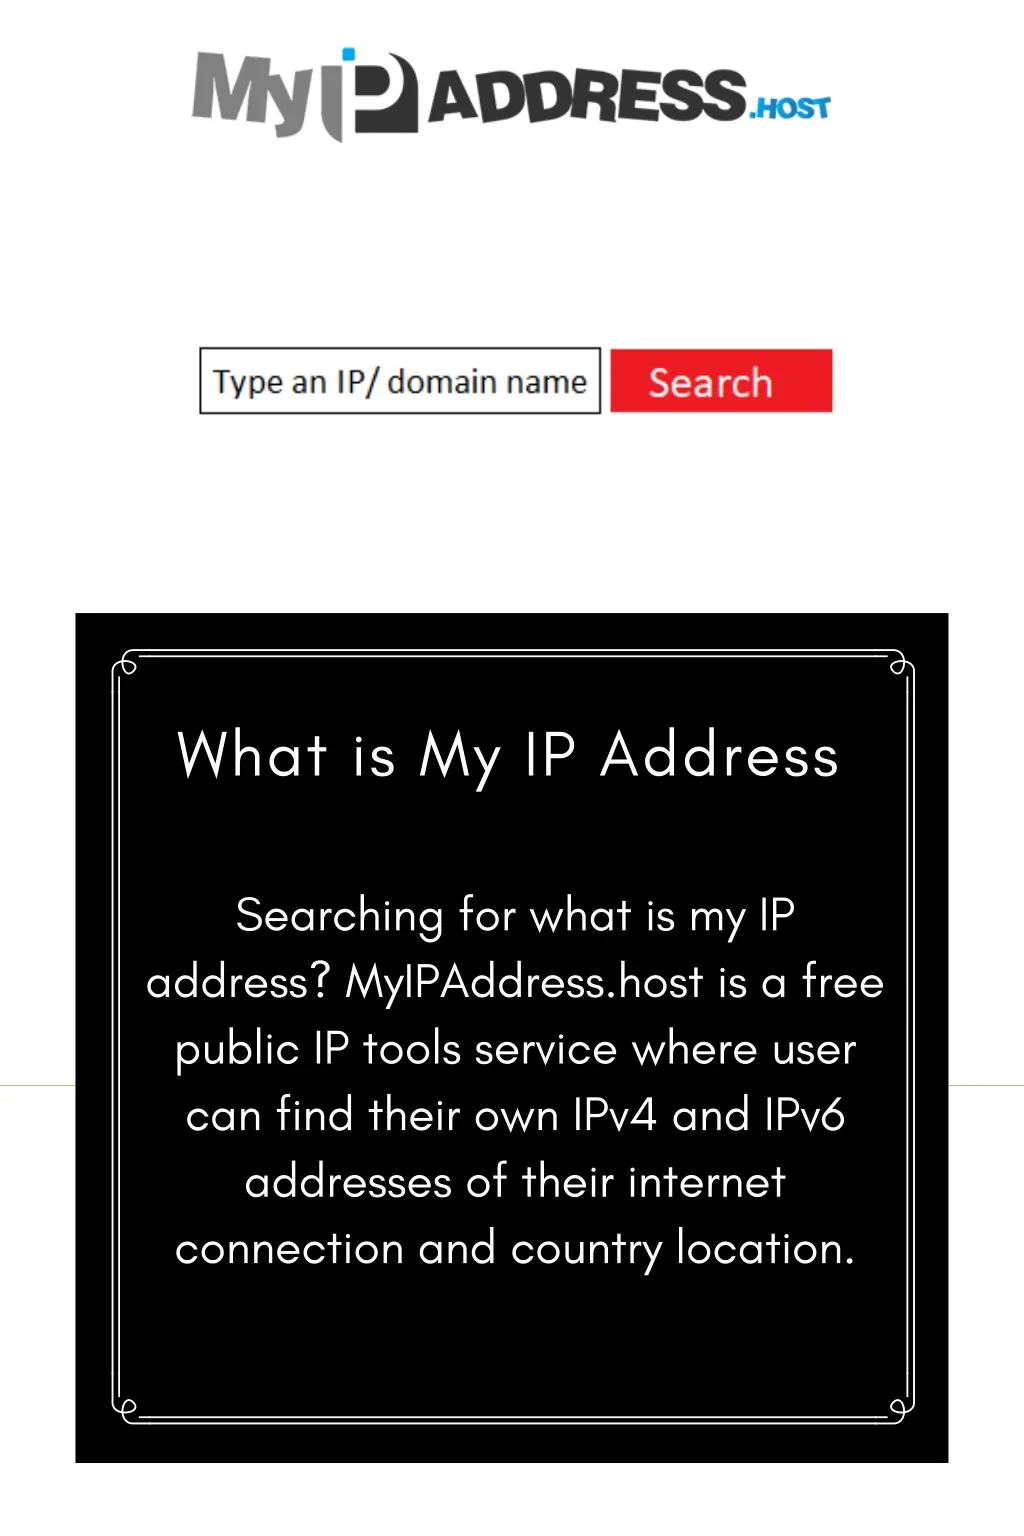 what is my ip address